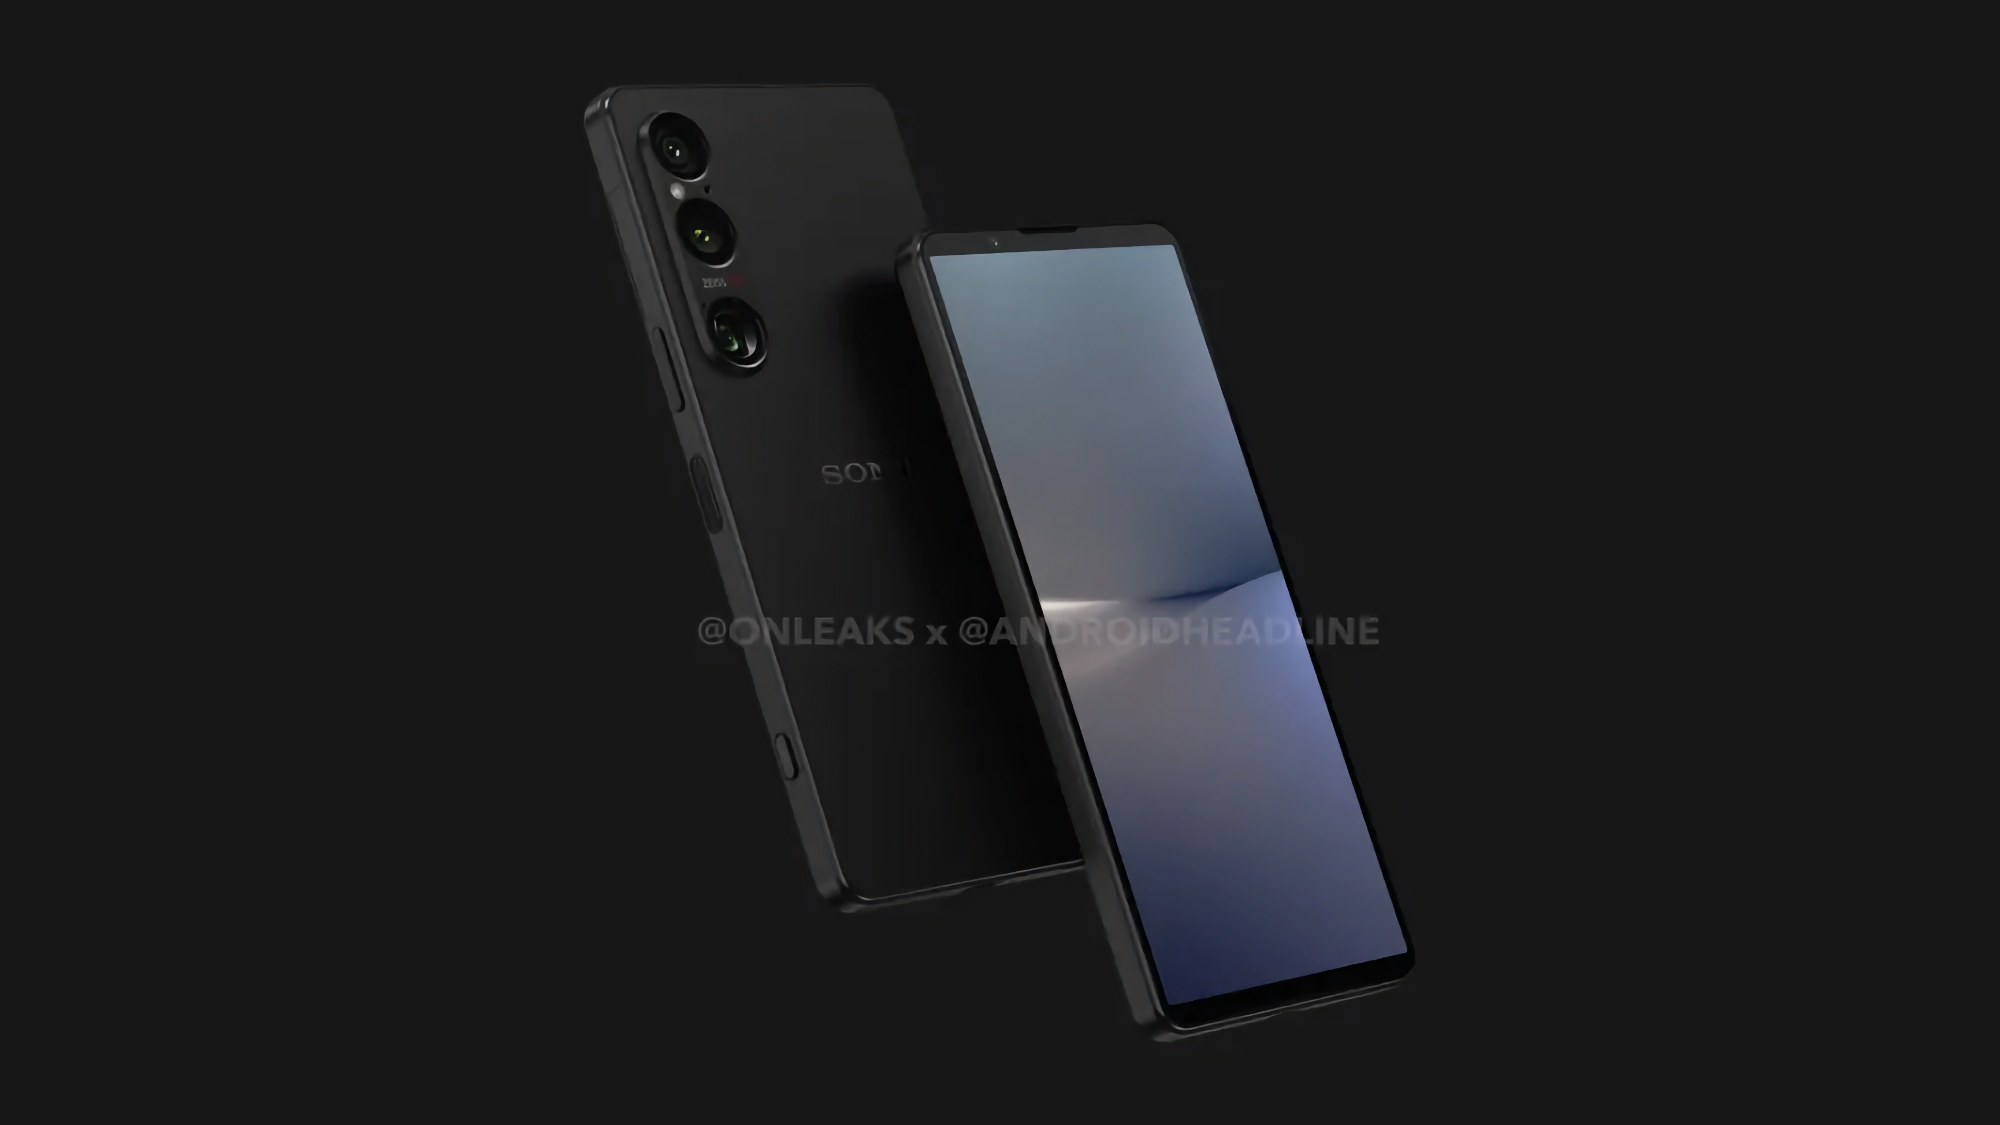 Minimal changes: insider reveals what the Sony Xperia 1 VI will look like